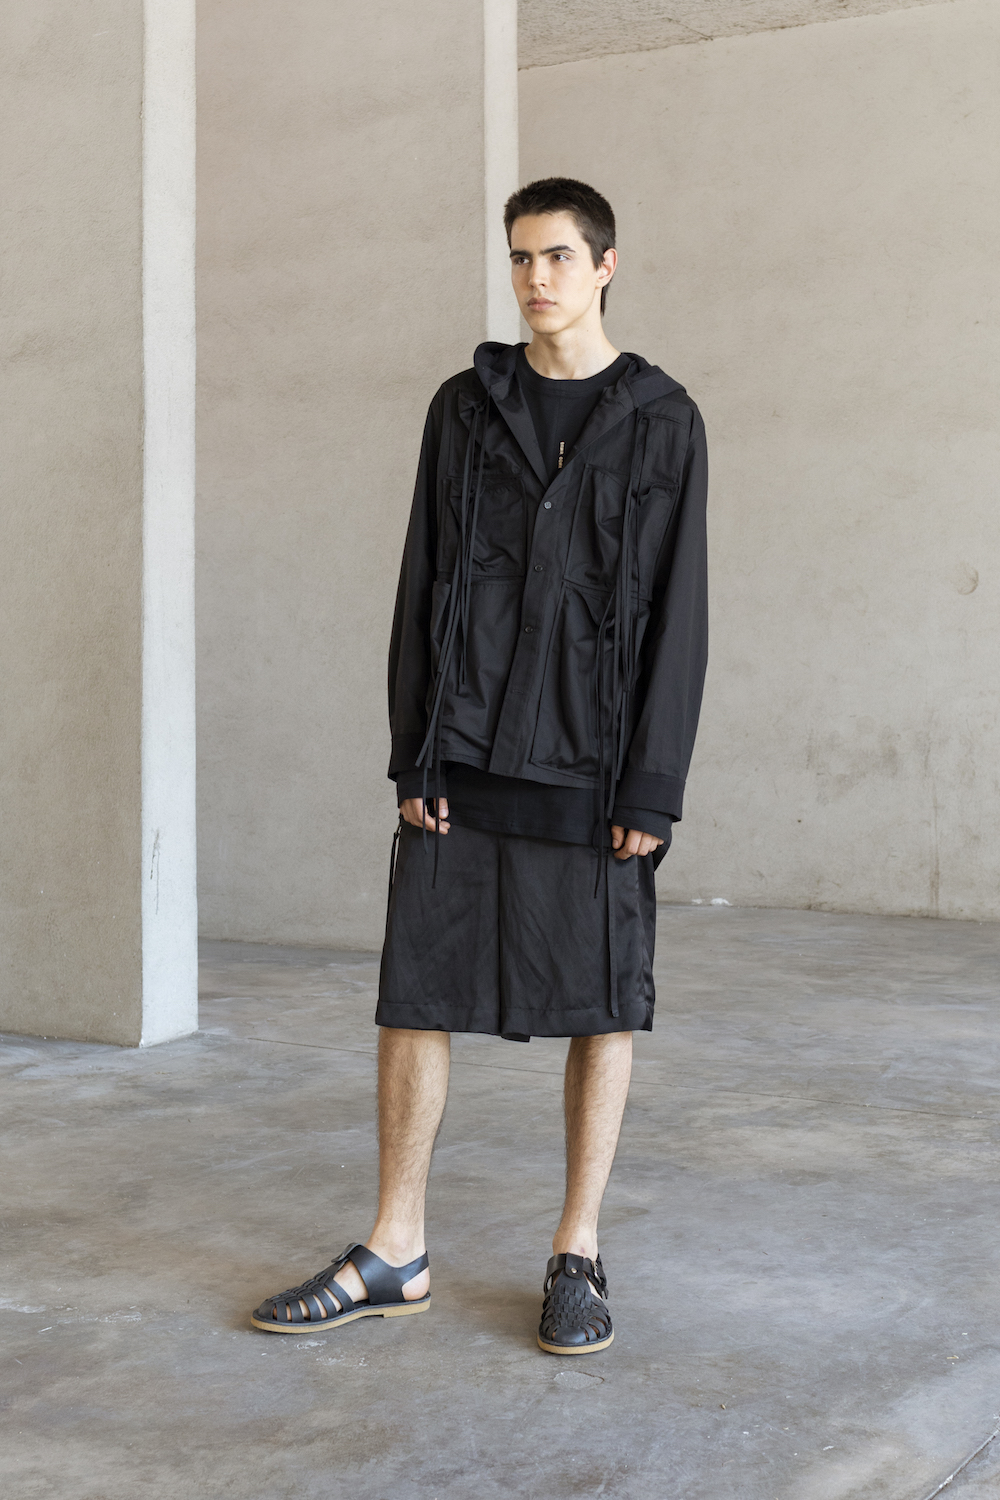 Damir Doma Debuts Minimalist Streetwear-Infused SS19 Collection